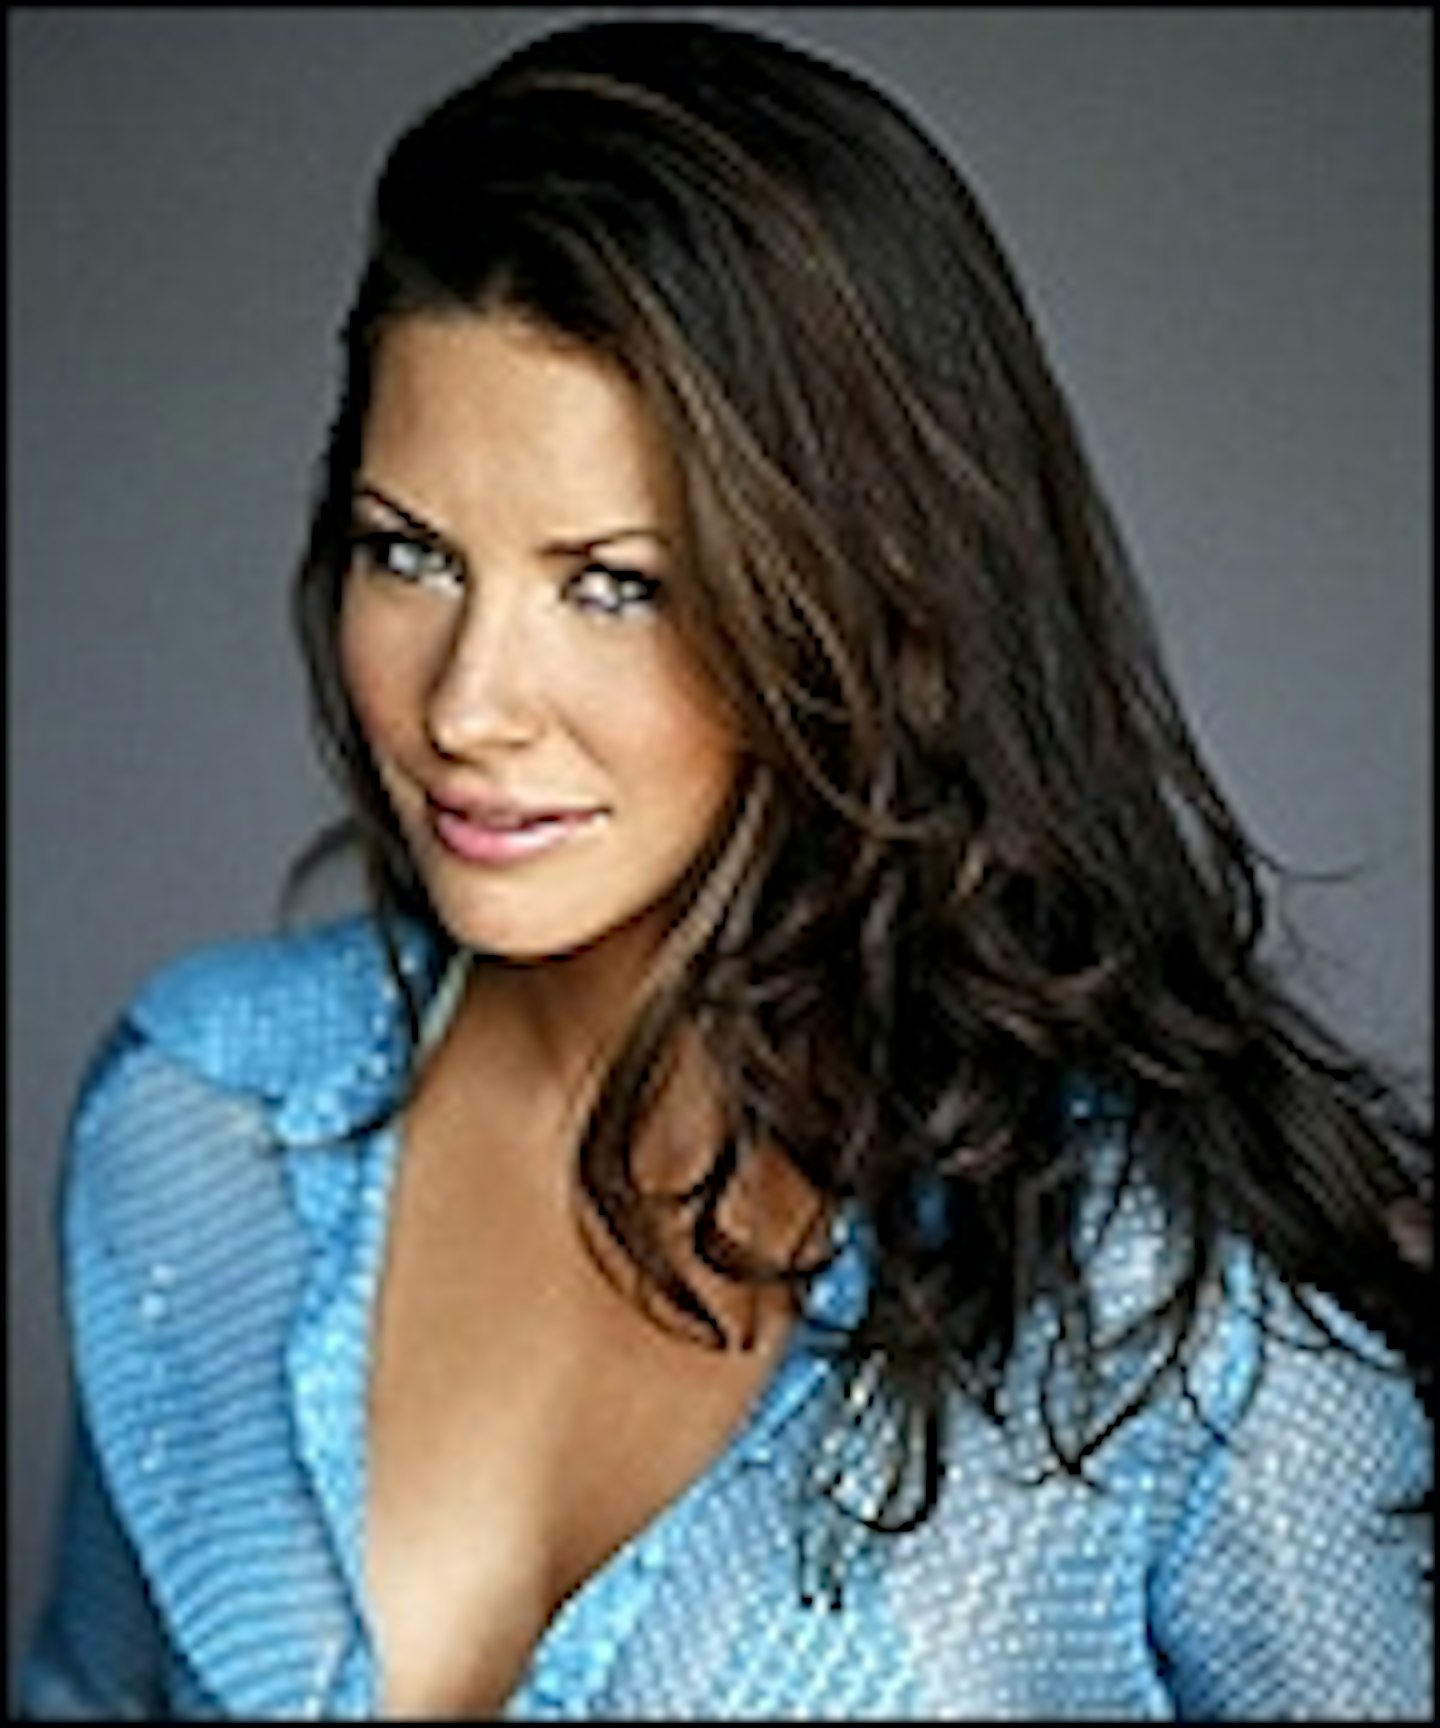 Evangeline Lilly Joins The Hobbit